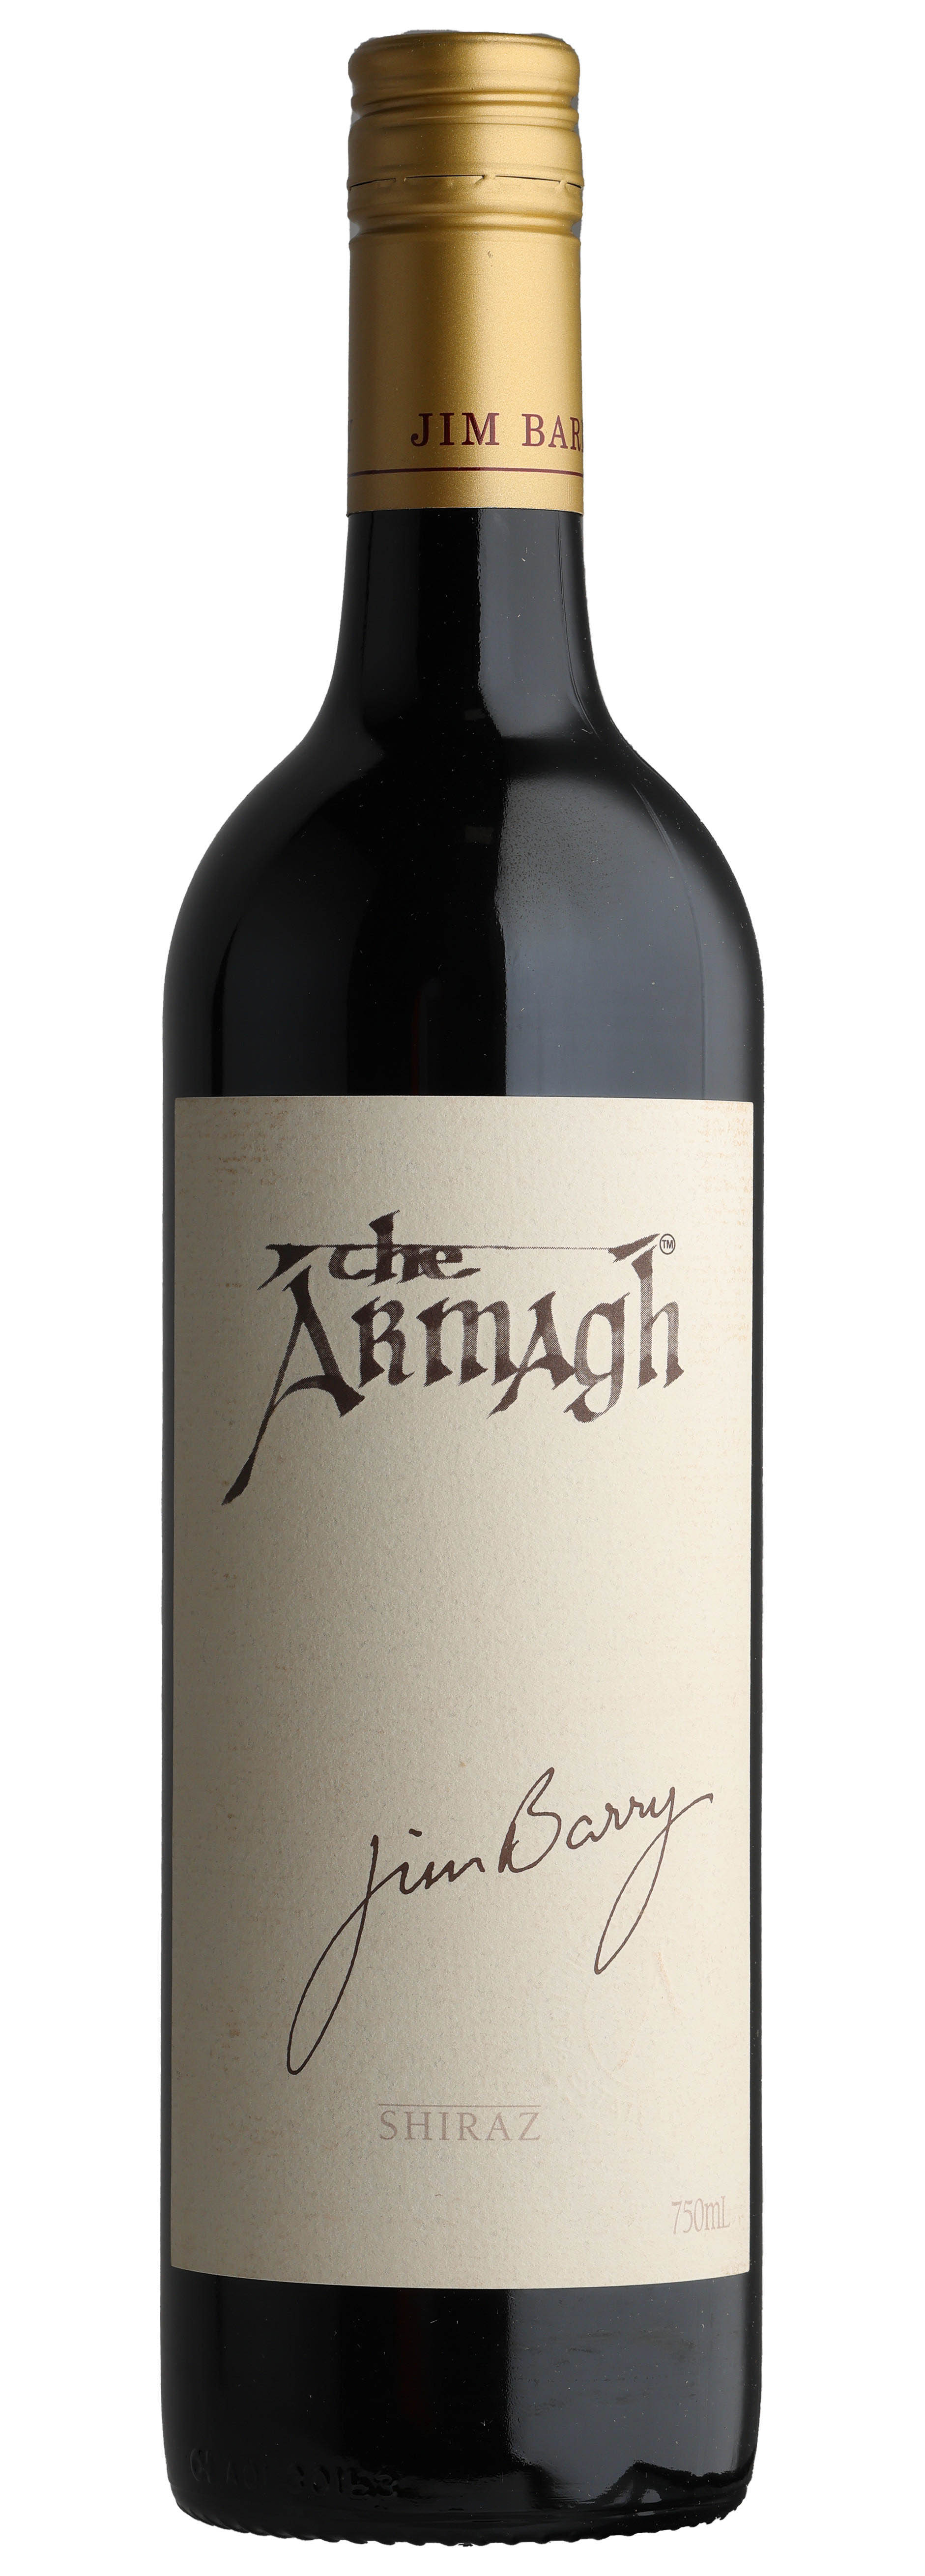 2014 Jim Barry The Armagh Shiraz (Clare)